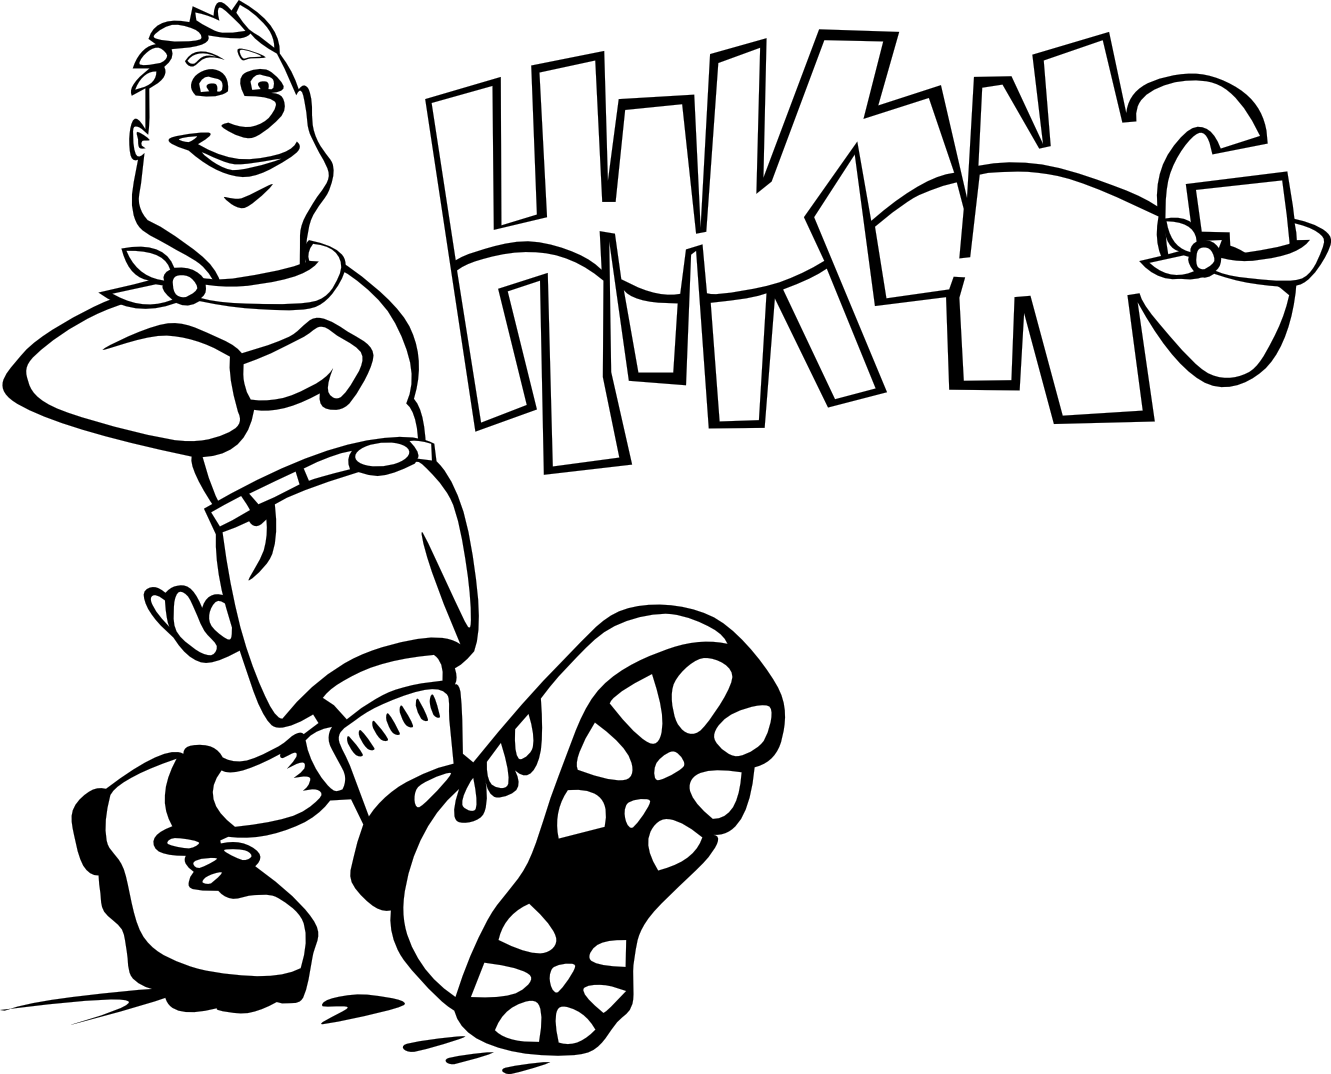 Hiking Clipart Black And White - Hiking Black And White, Transparent background PNG HD thumbnail